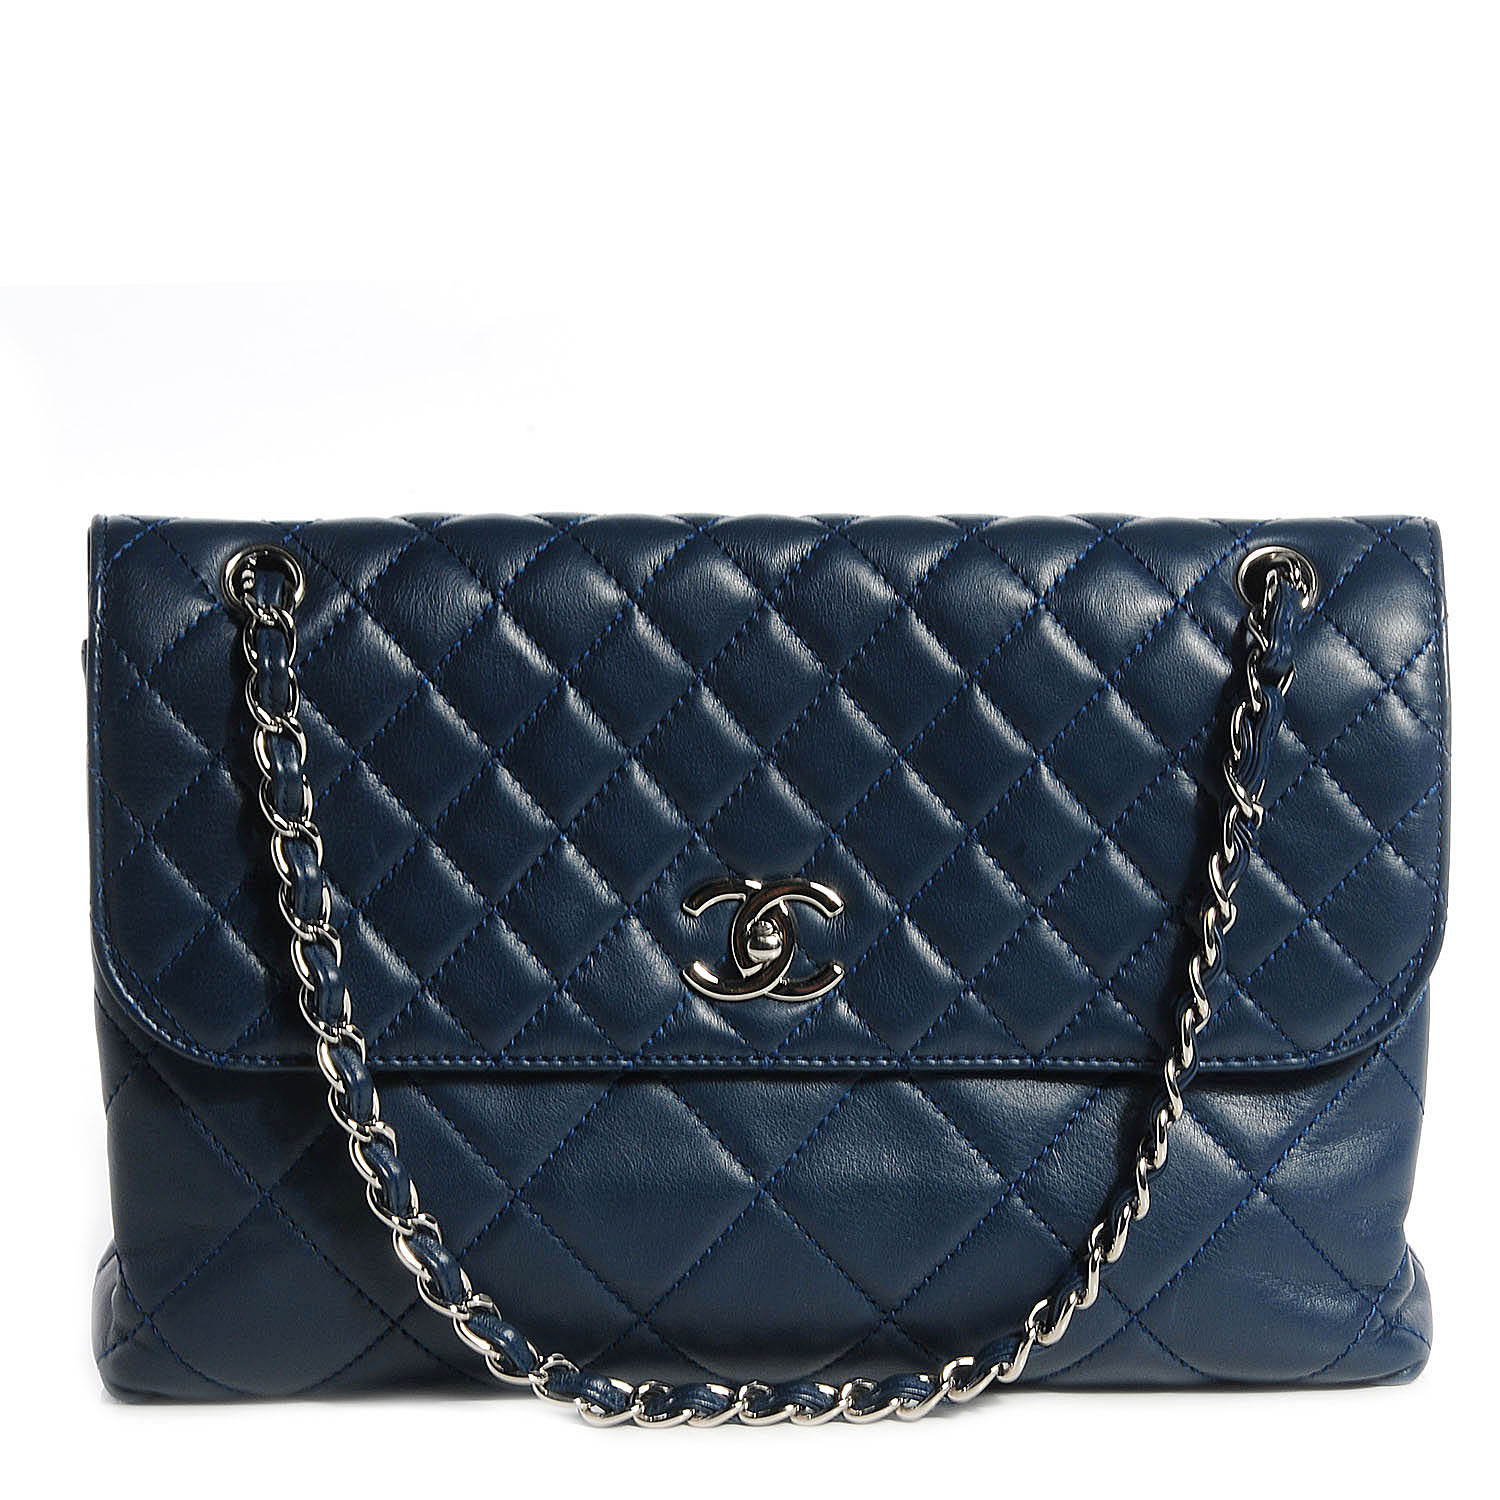 CHANEL Calfskin Quilted In the Business Flap Bag Dark Blue 77091